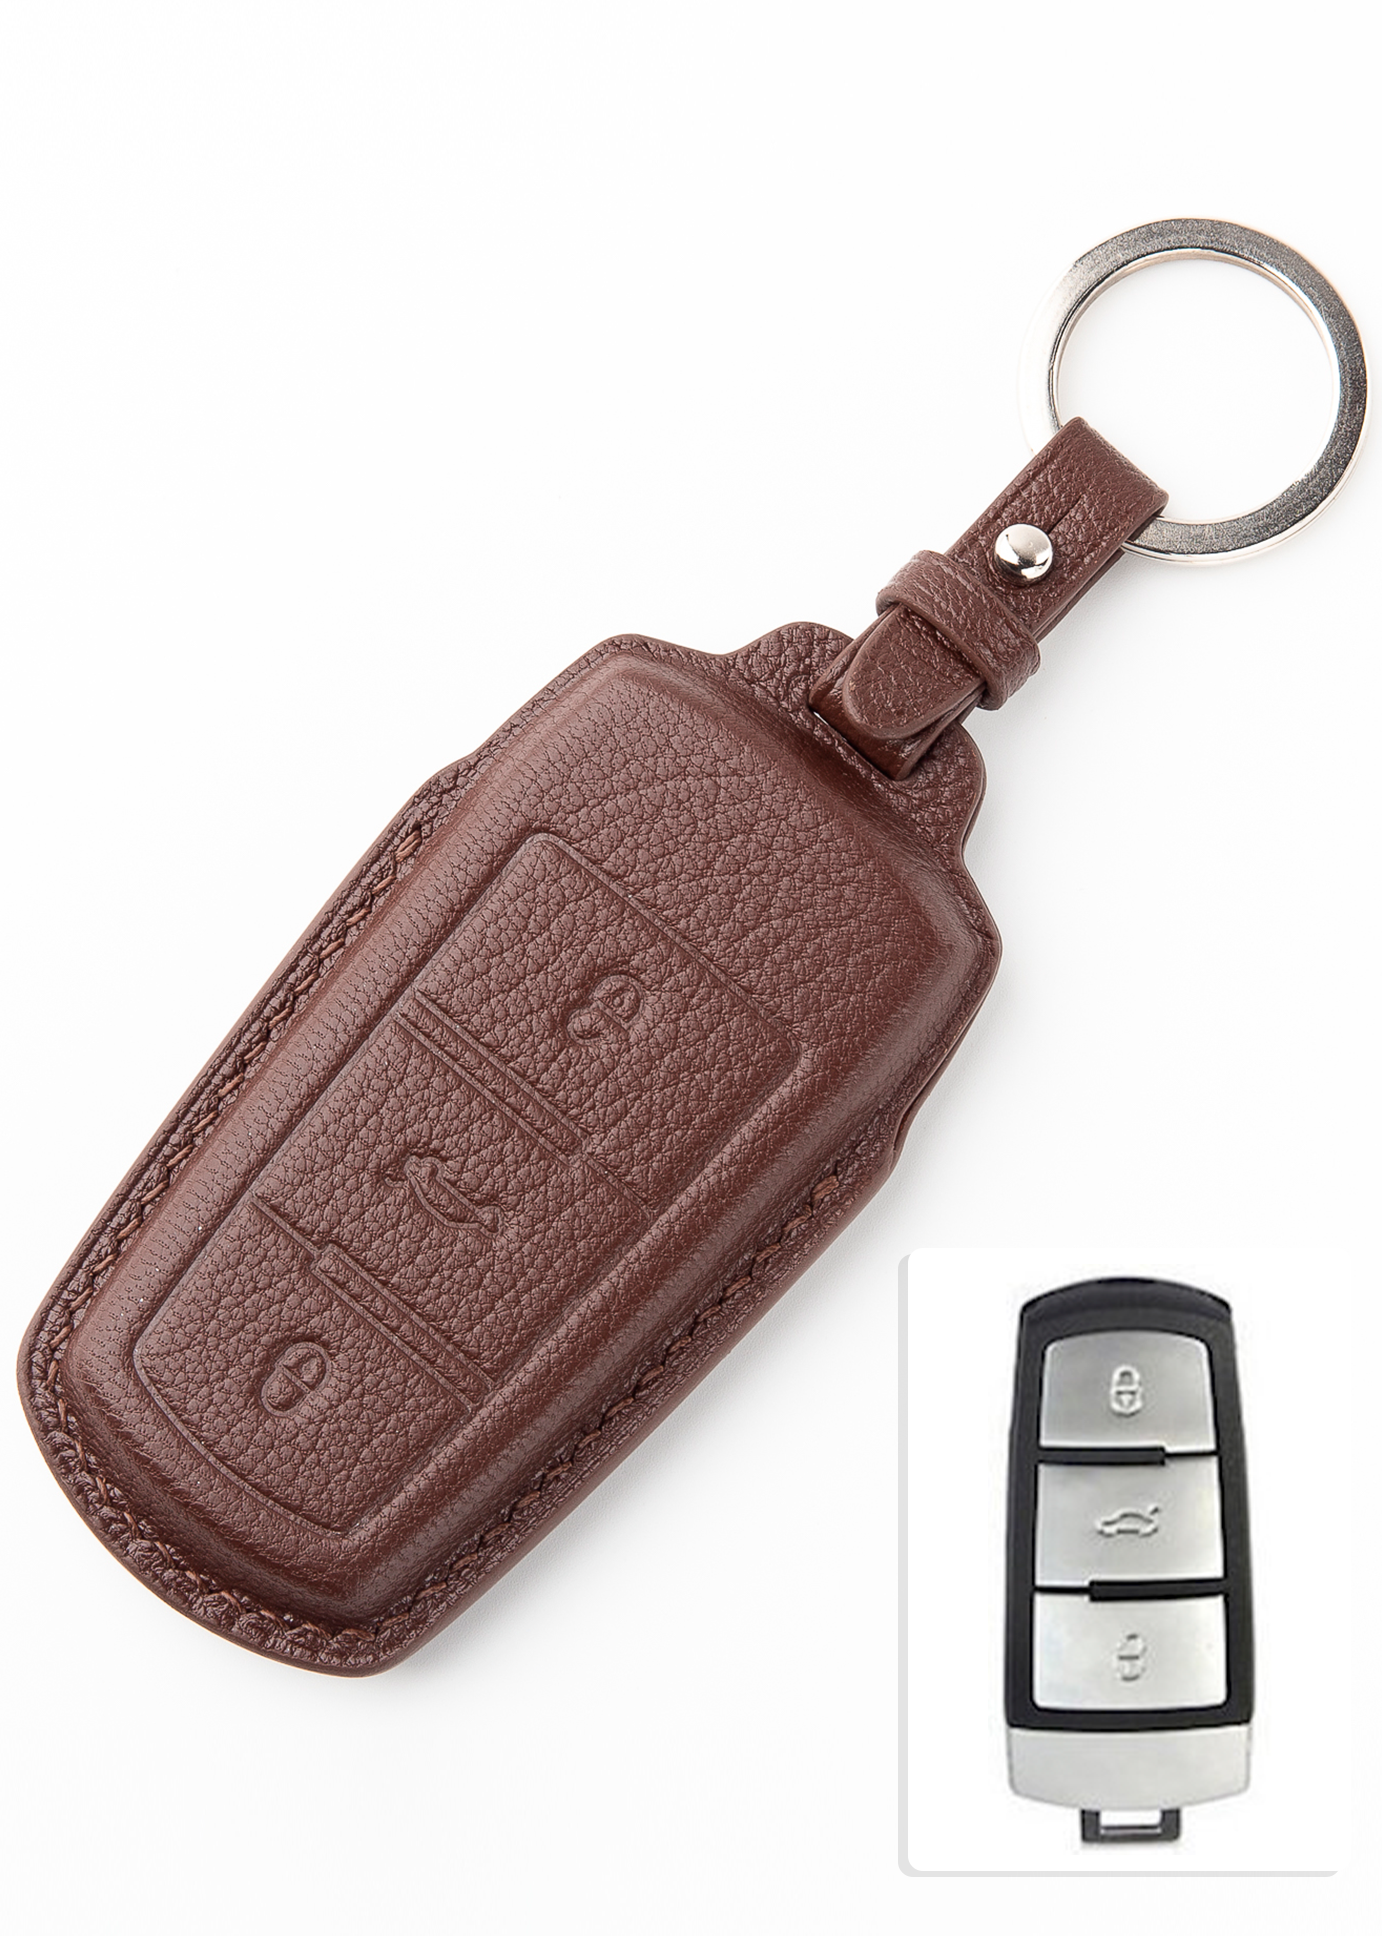 Timotheus for Volkswagen key fob cover case, Compatible with Volkswagen key case, Handmade Genuine Leather for Volkswagen keychains | VG44